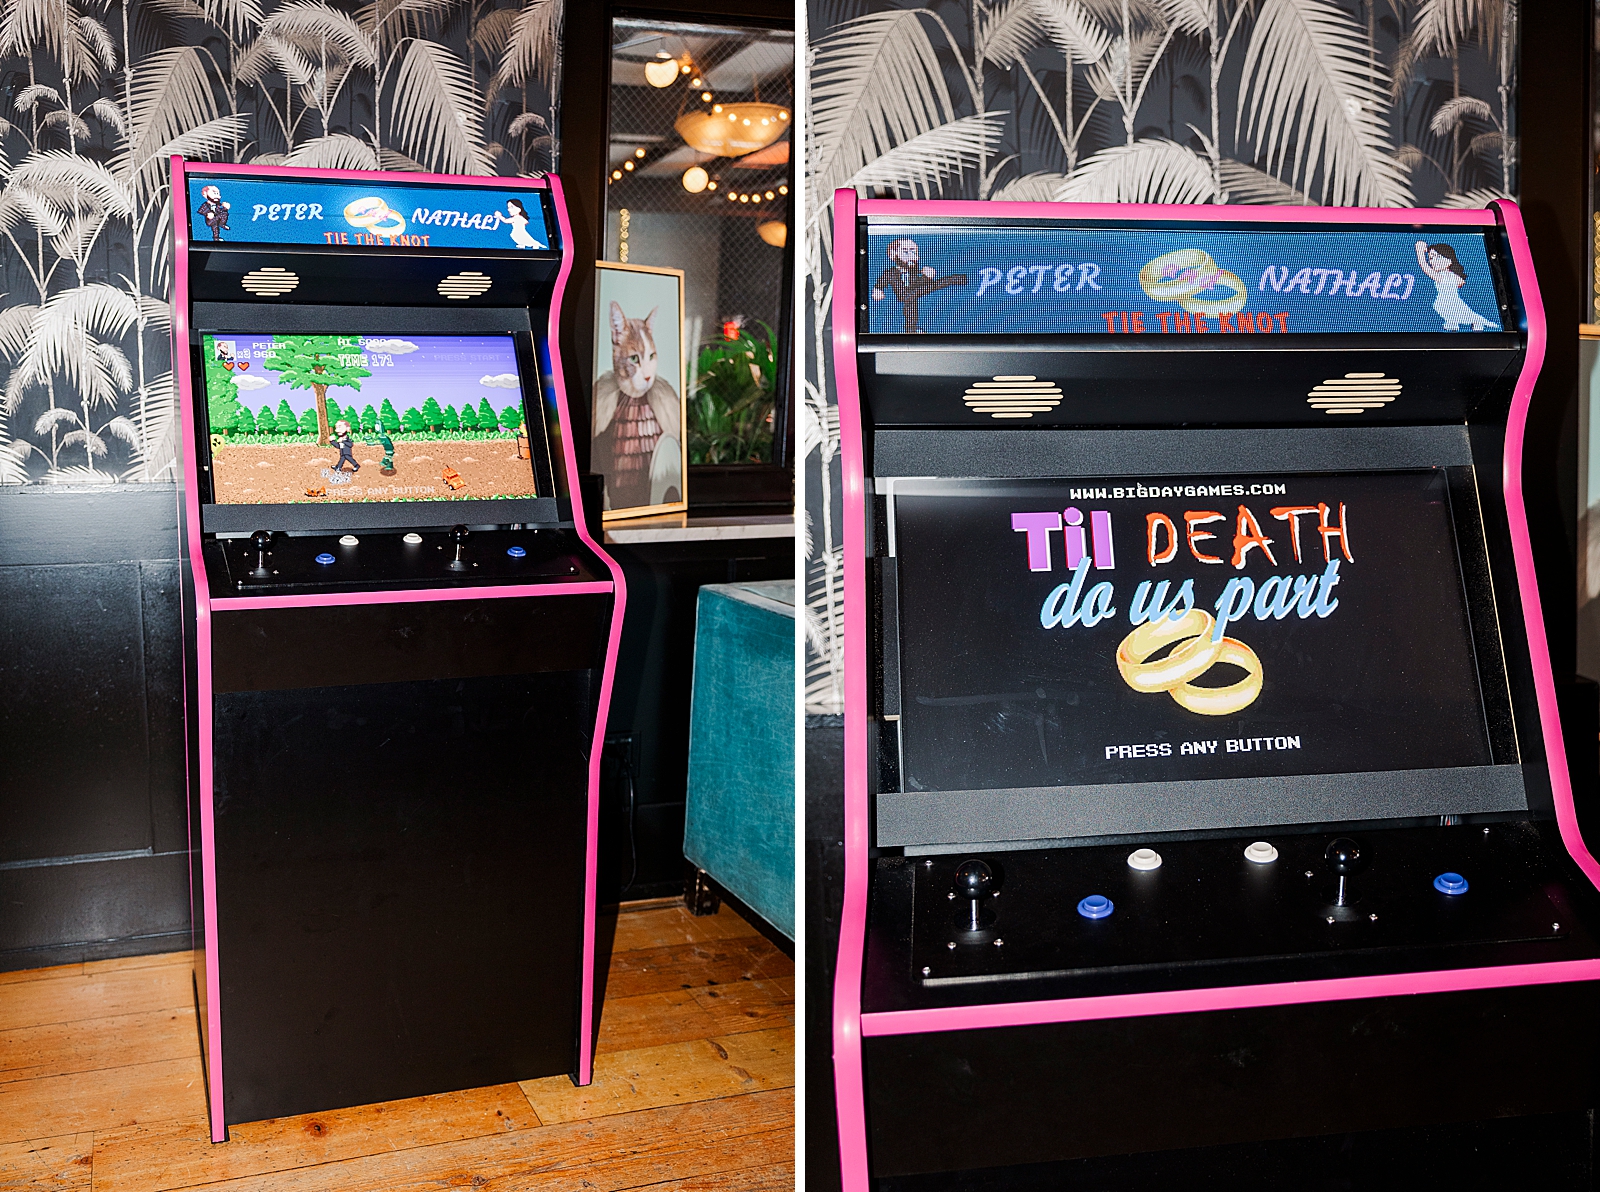 Left photo: Full shot of a custom arcade style video game featuring the bride and groom. 
Right photo: Close up shot of a custom arcade style video game featuring the bride and groom. 